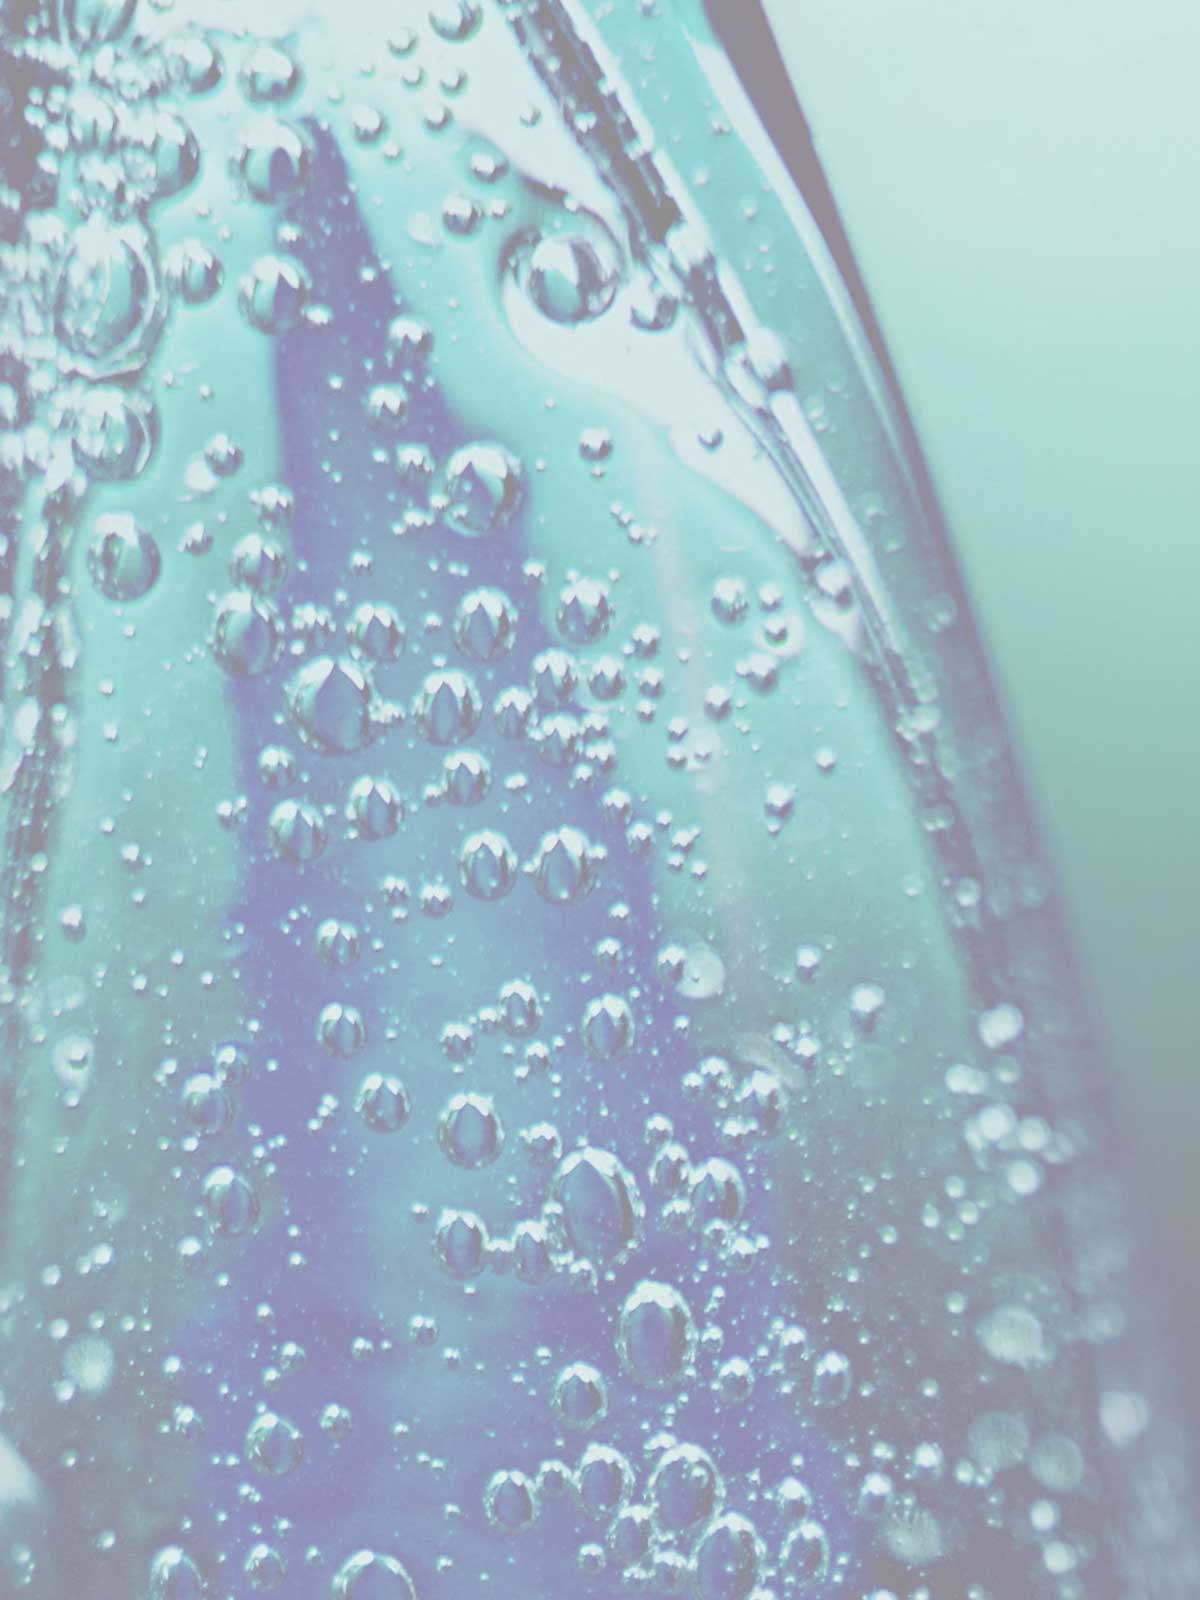 A close up of a bottle with bubbles in it.